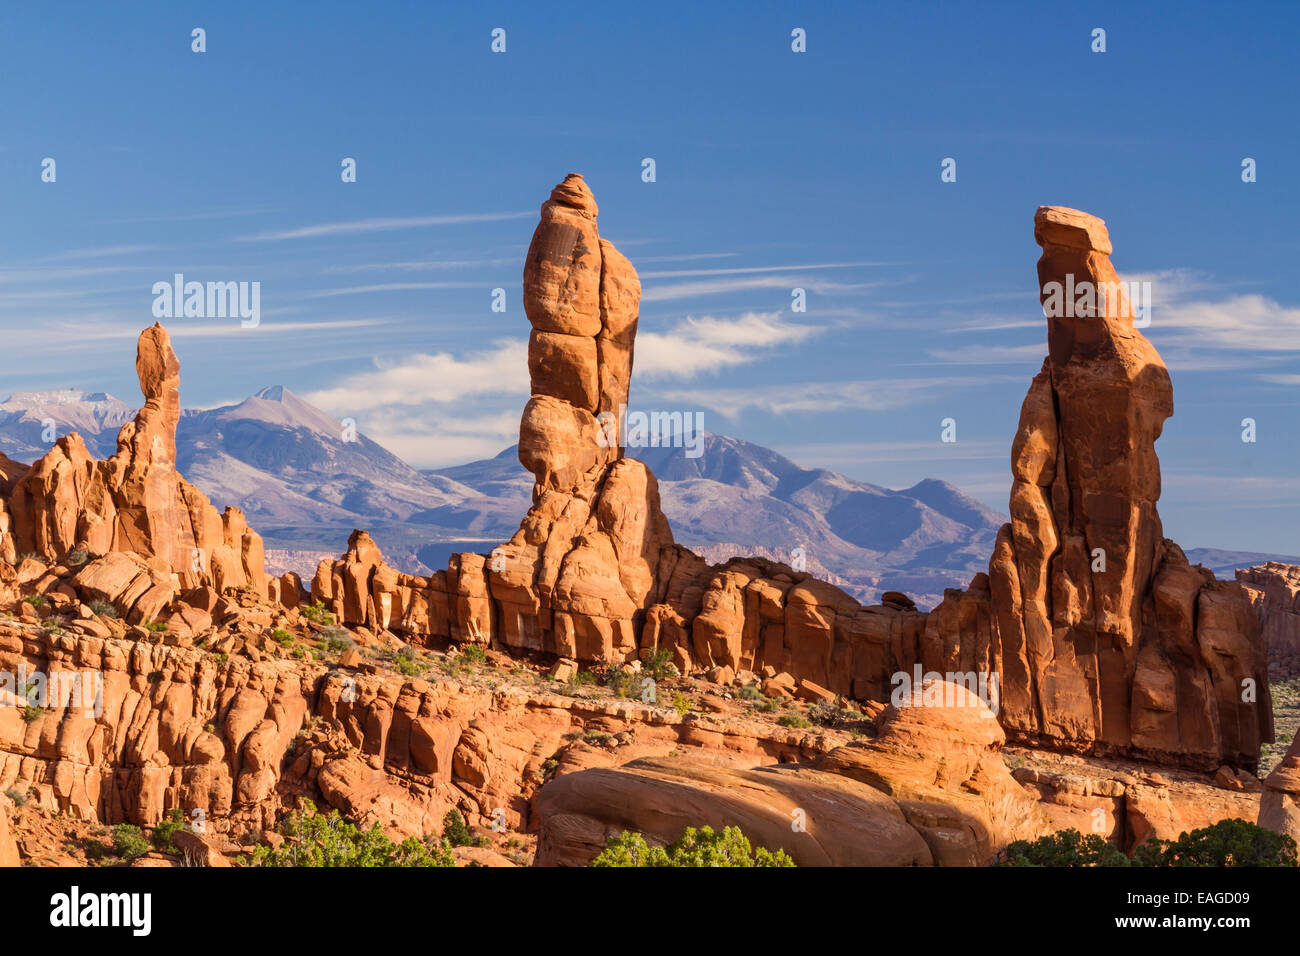 Three 'Marching Men' sandstone pillars in front of the La Sal Mountains in the Klondike Bluffs area of Arches National Park, Uta Stock Photo